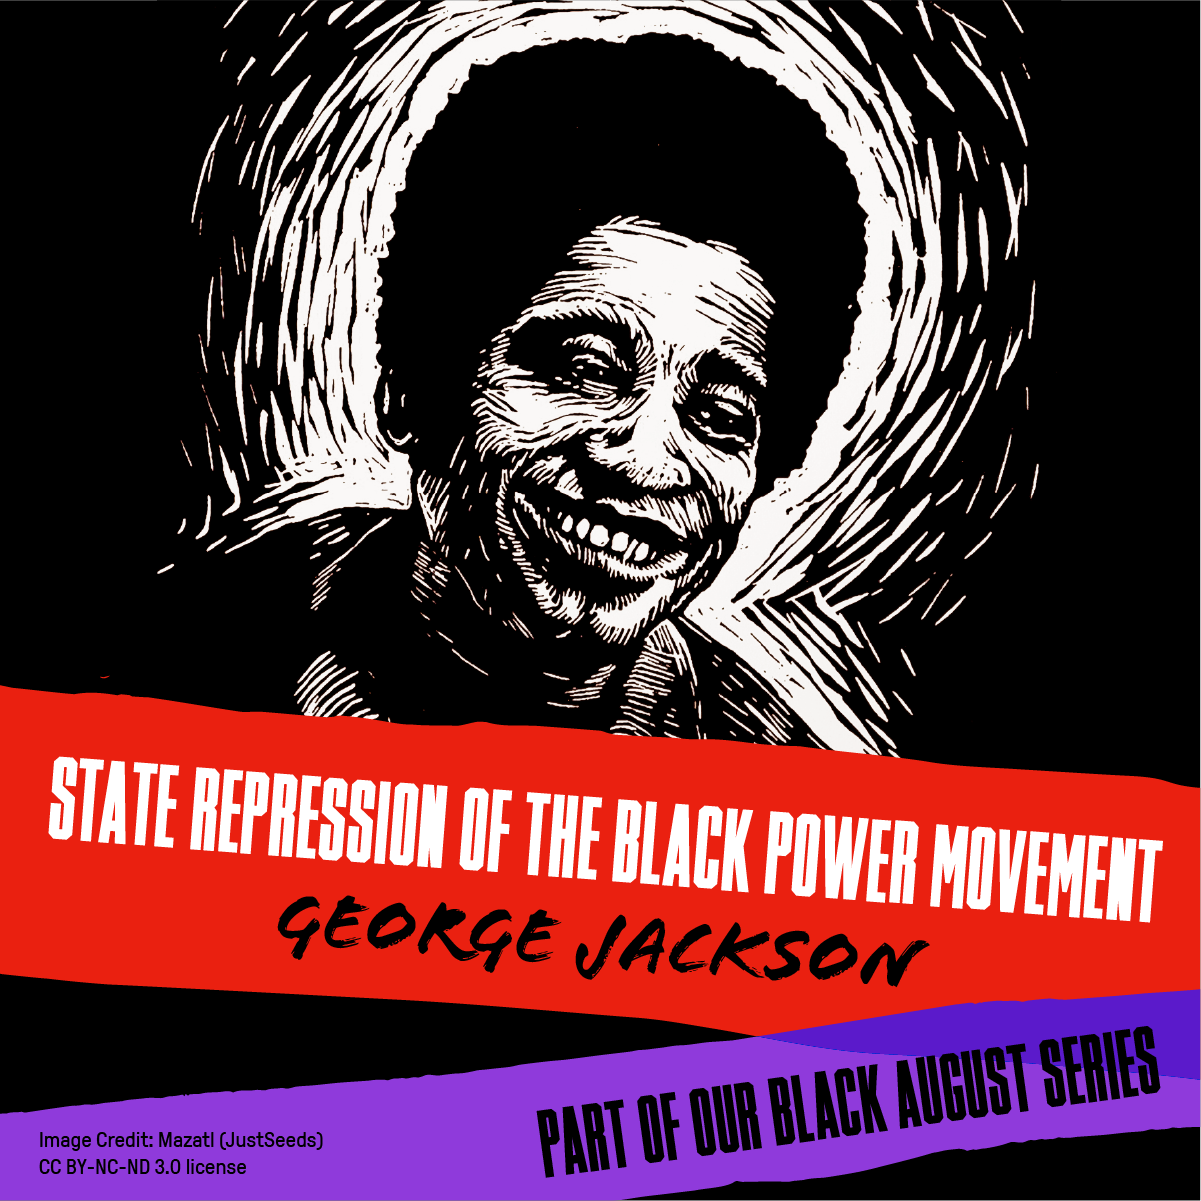 Illustration of George Jackson with the title State Repression of the Black Power Movement